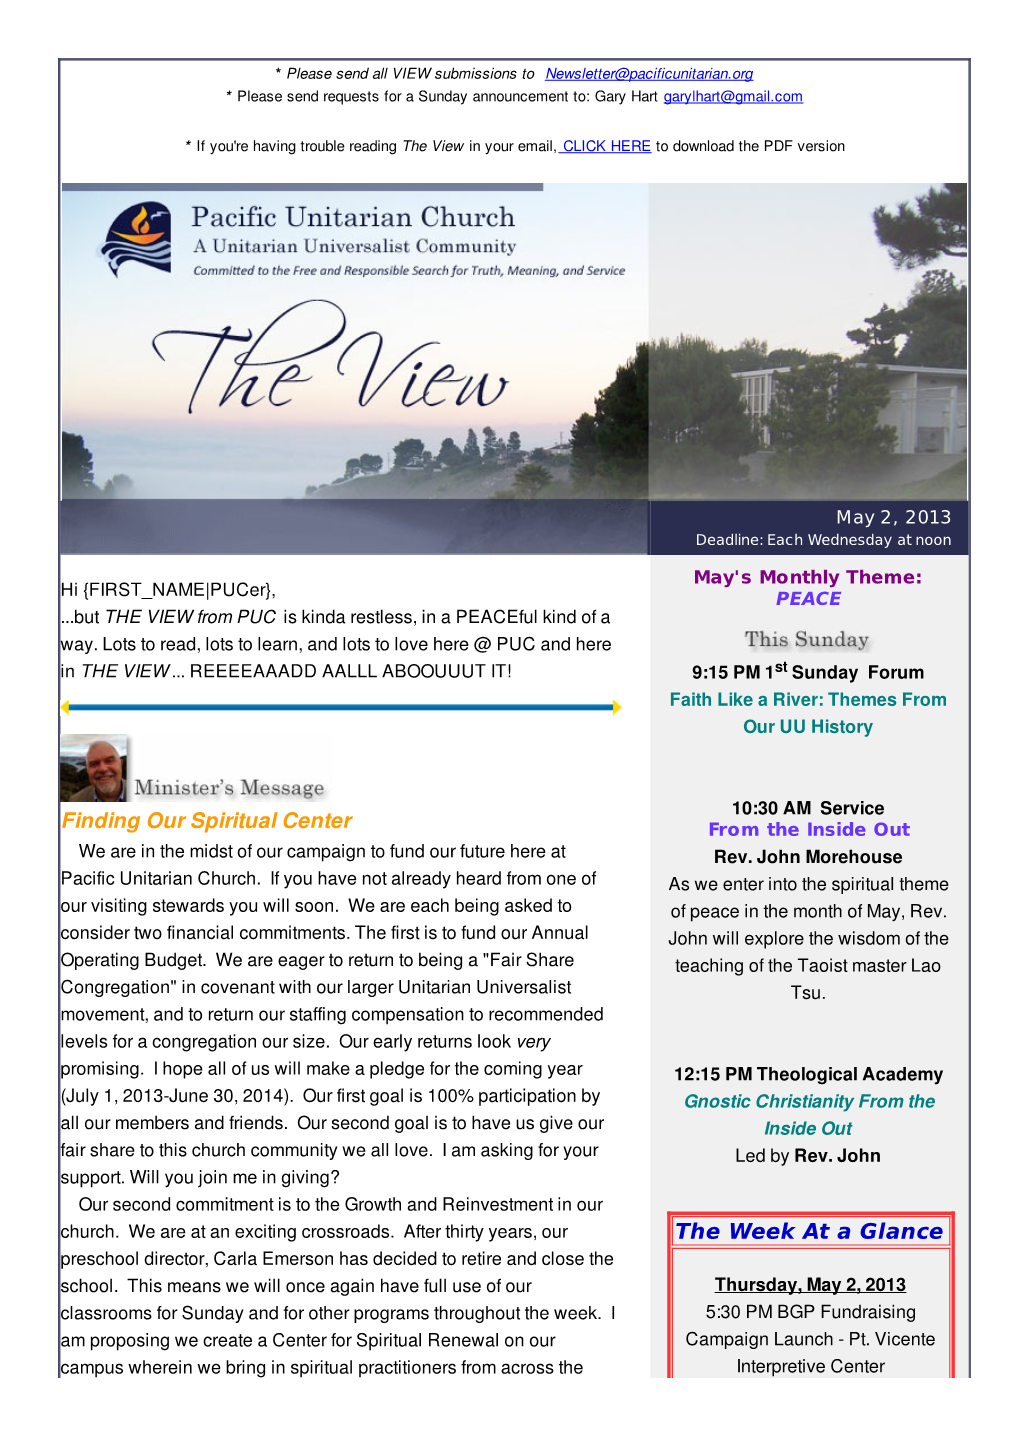 The View in Your Email, CLICK HERE to Download the PDF Version